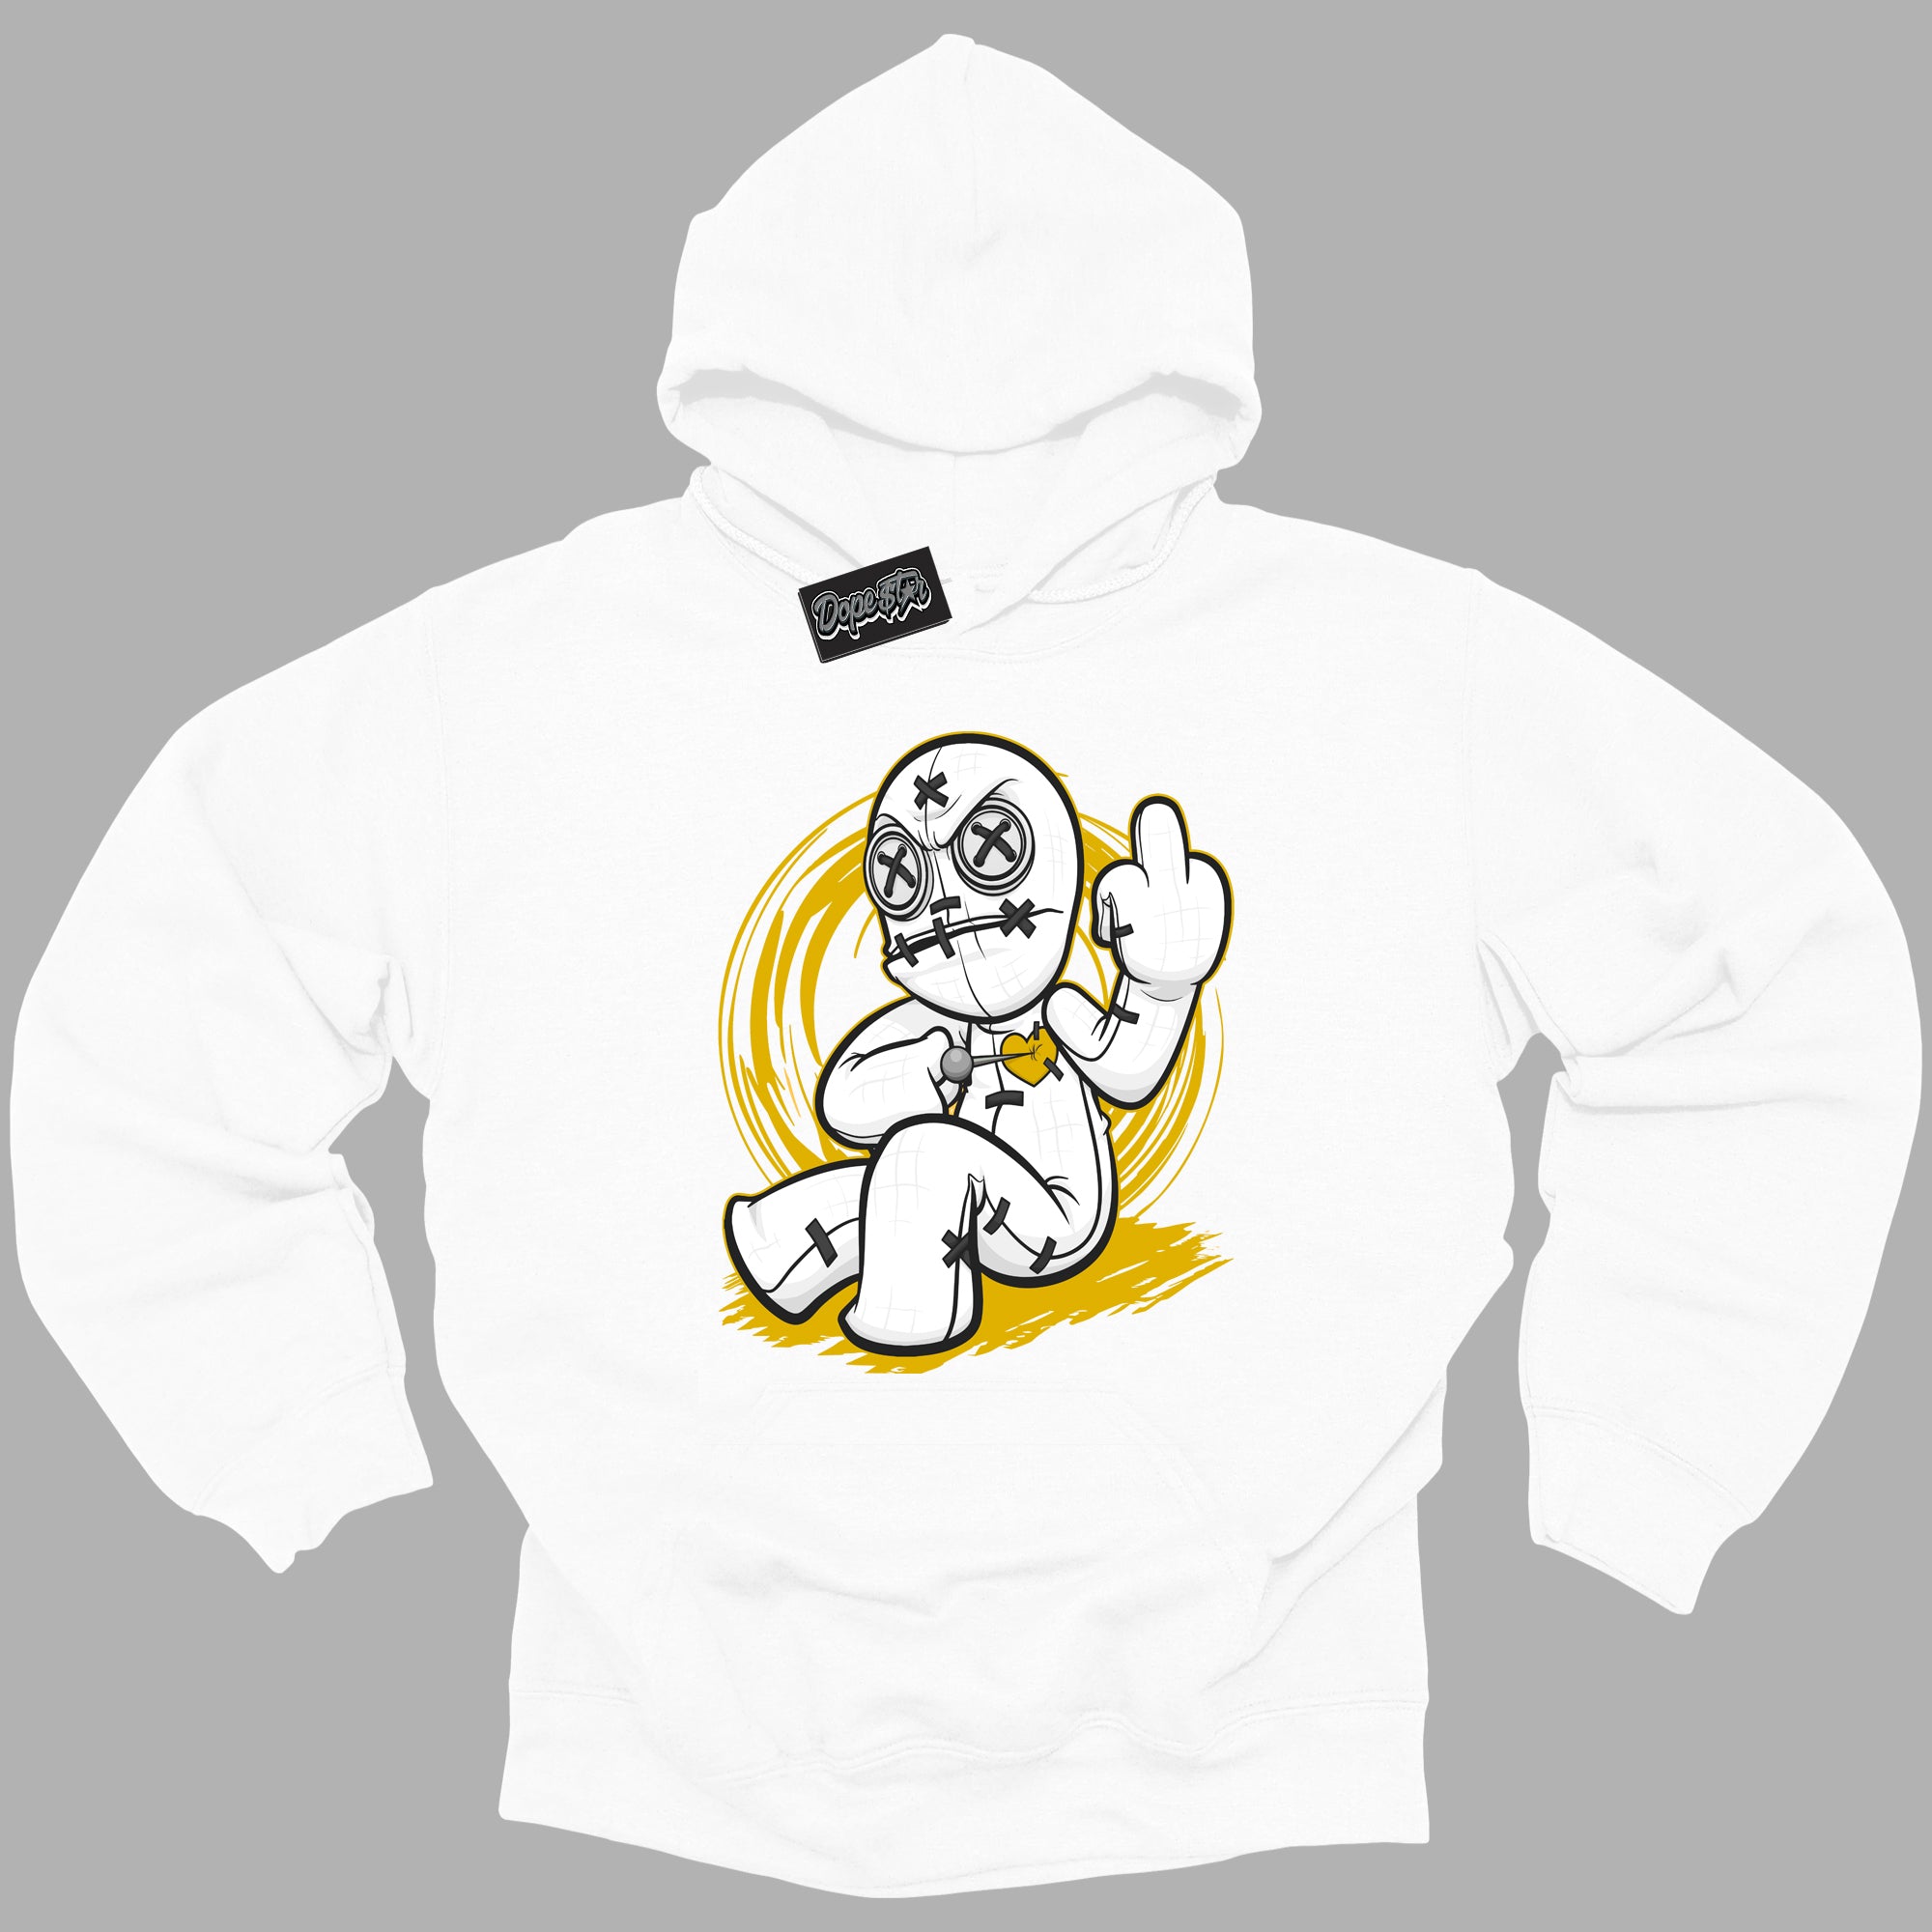 Cool White Hoodie with “ VooDoo Doll ”  design that Perfectly Matches Yellow Ochre 6s Sneakers.